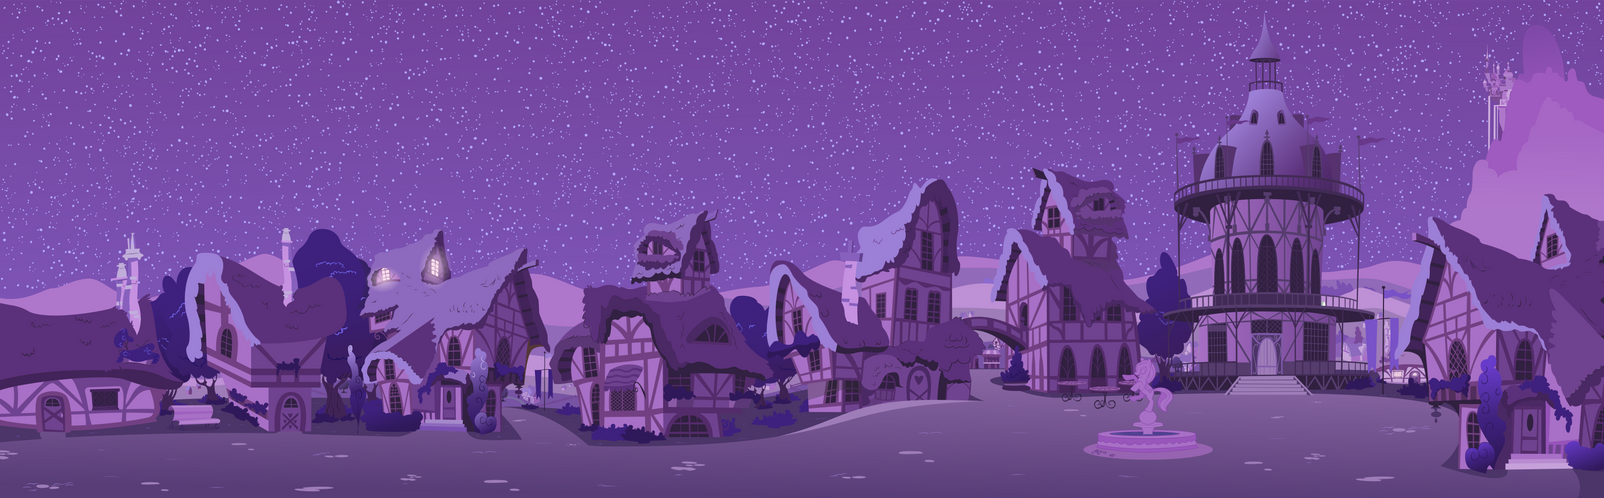 http://th07.deviantart.net/fs70/PRE/f/2014/134/1/3/ponyville_street_to_town_center__night__by_foxy_noxy-d7if4tl.png